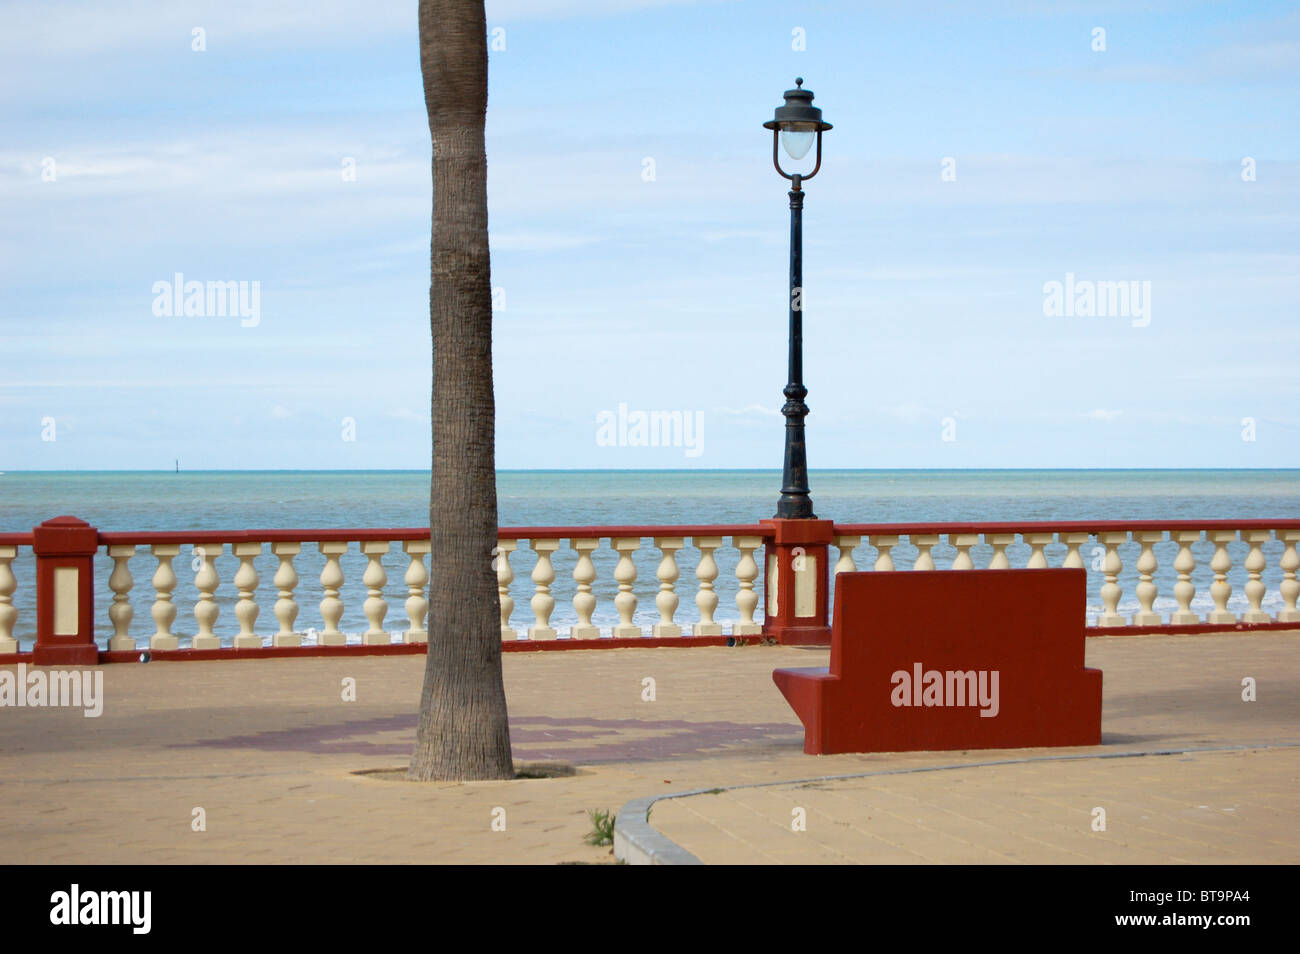 Concrete red bench looking out over Atlantic Ocean, in Chipiona, near Seville, Spain Stock Photo